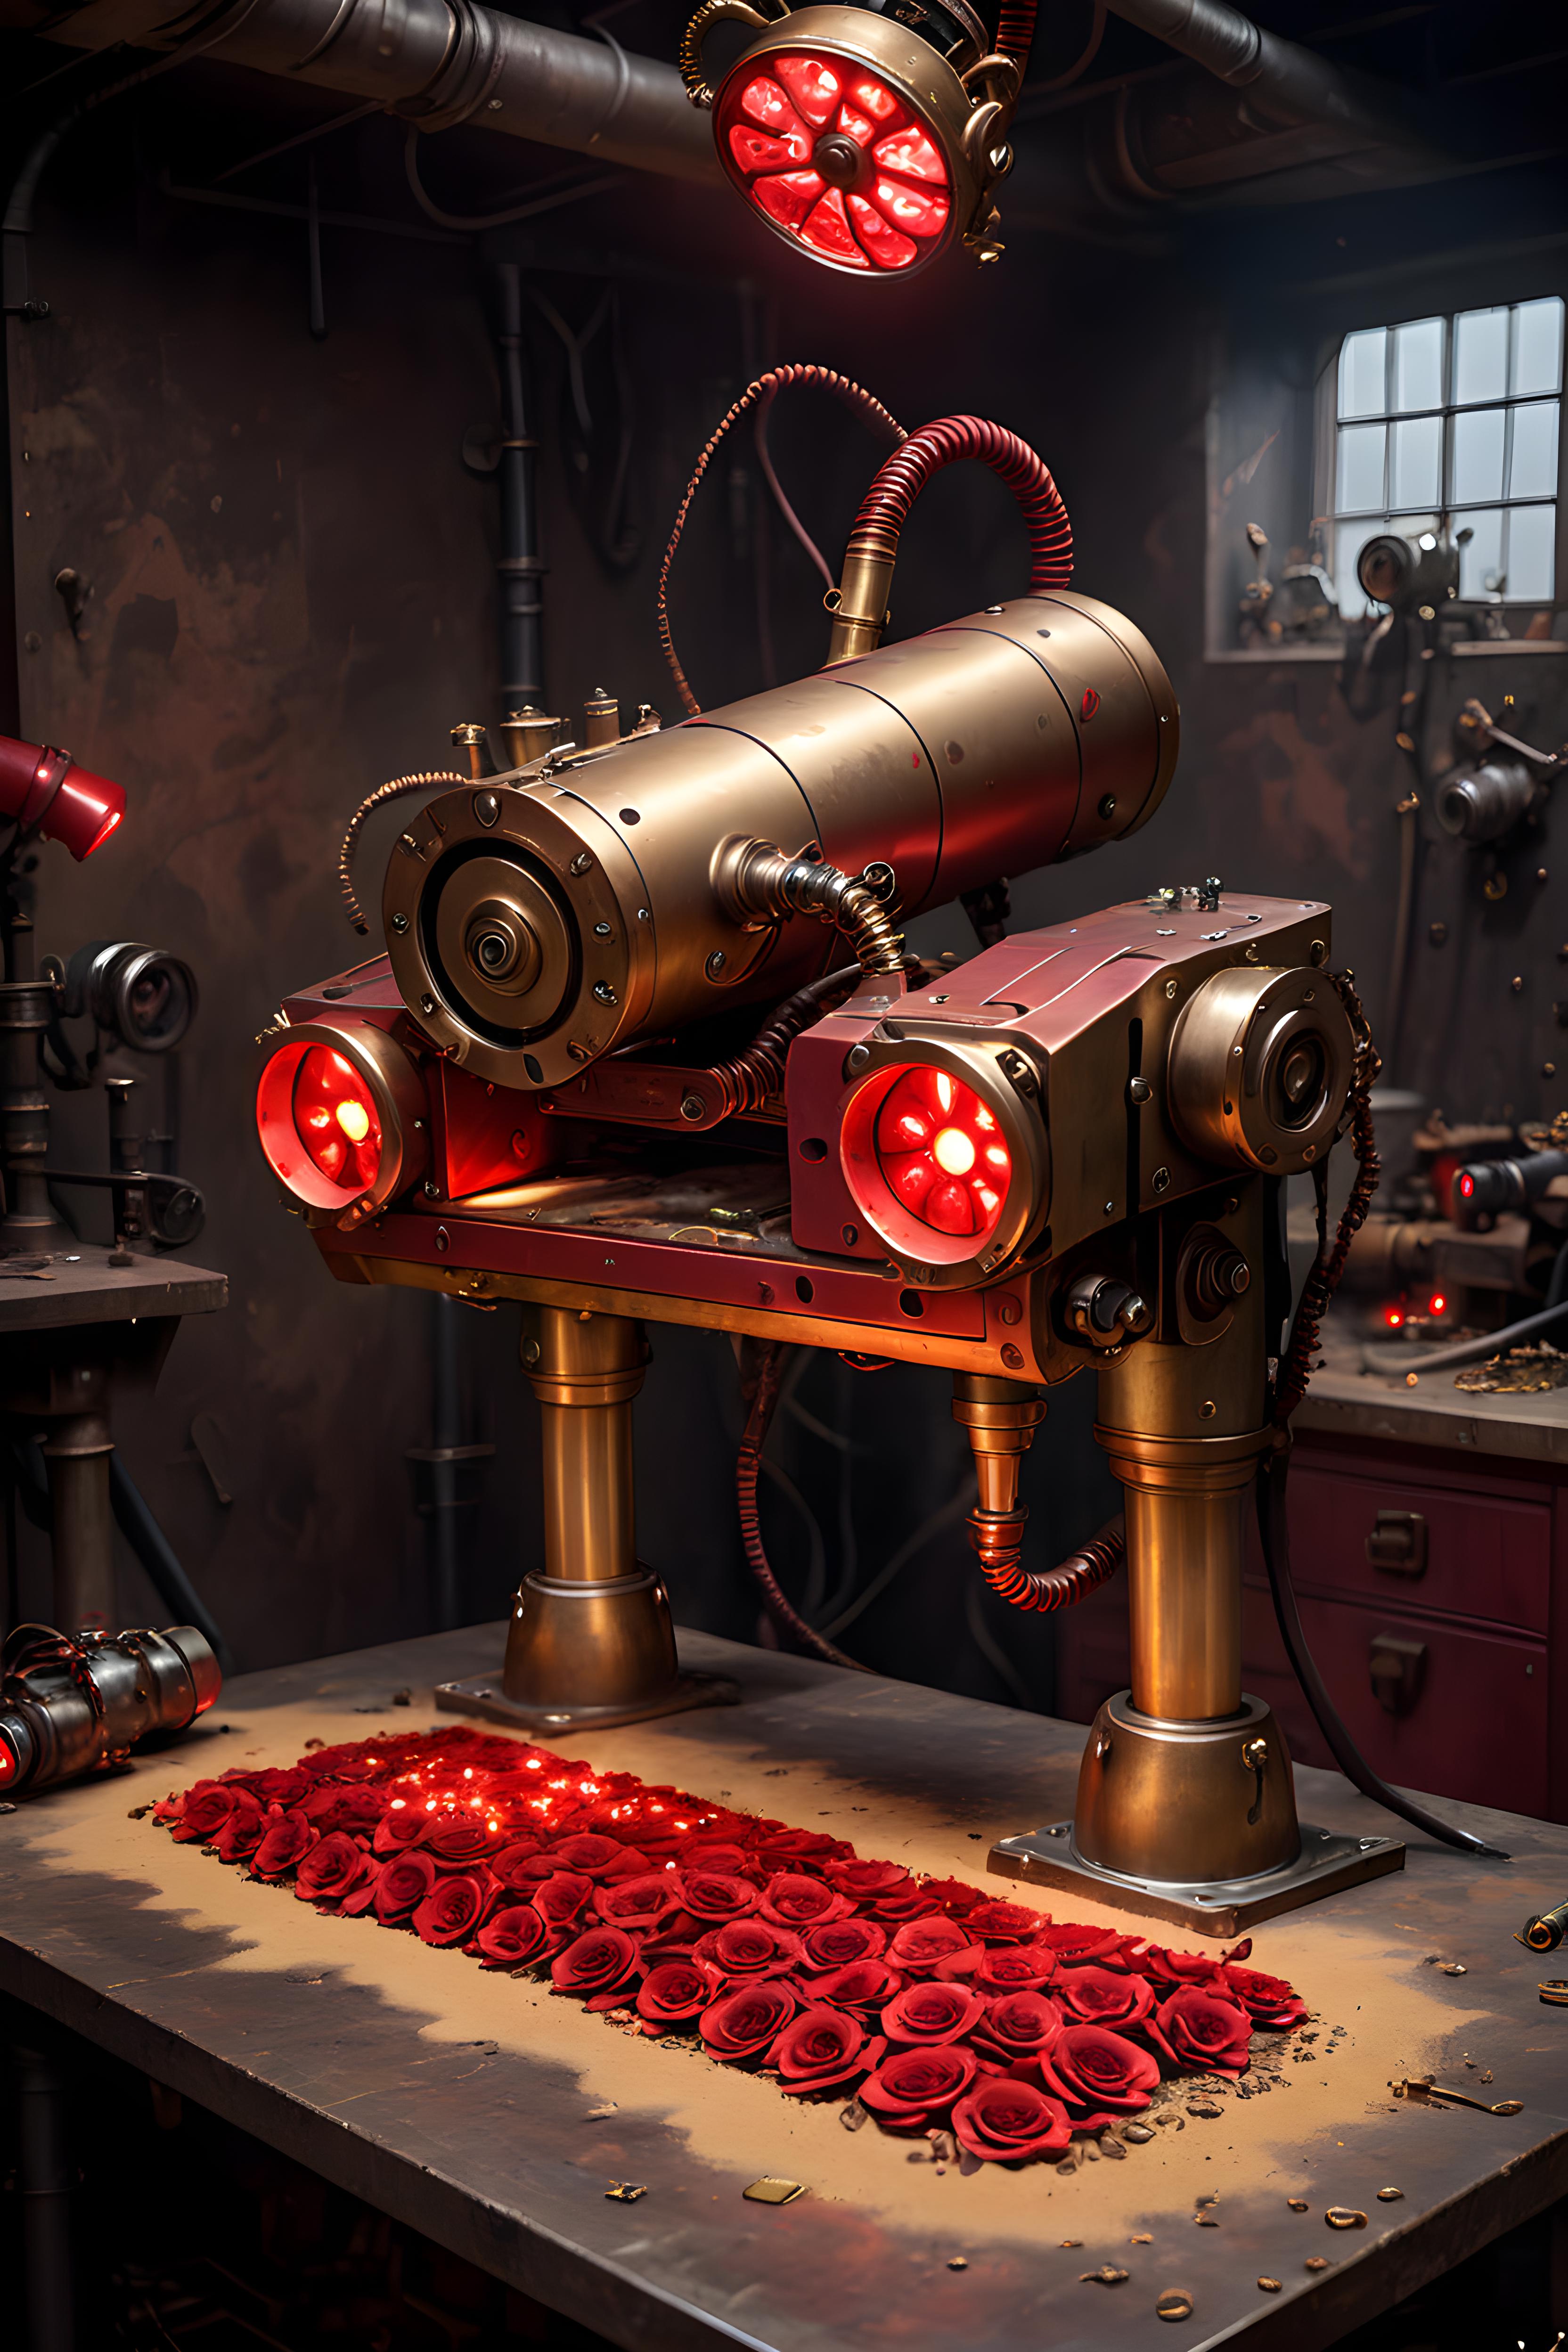 A large golden machine with a red rose and a glowing red light.